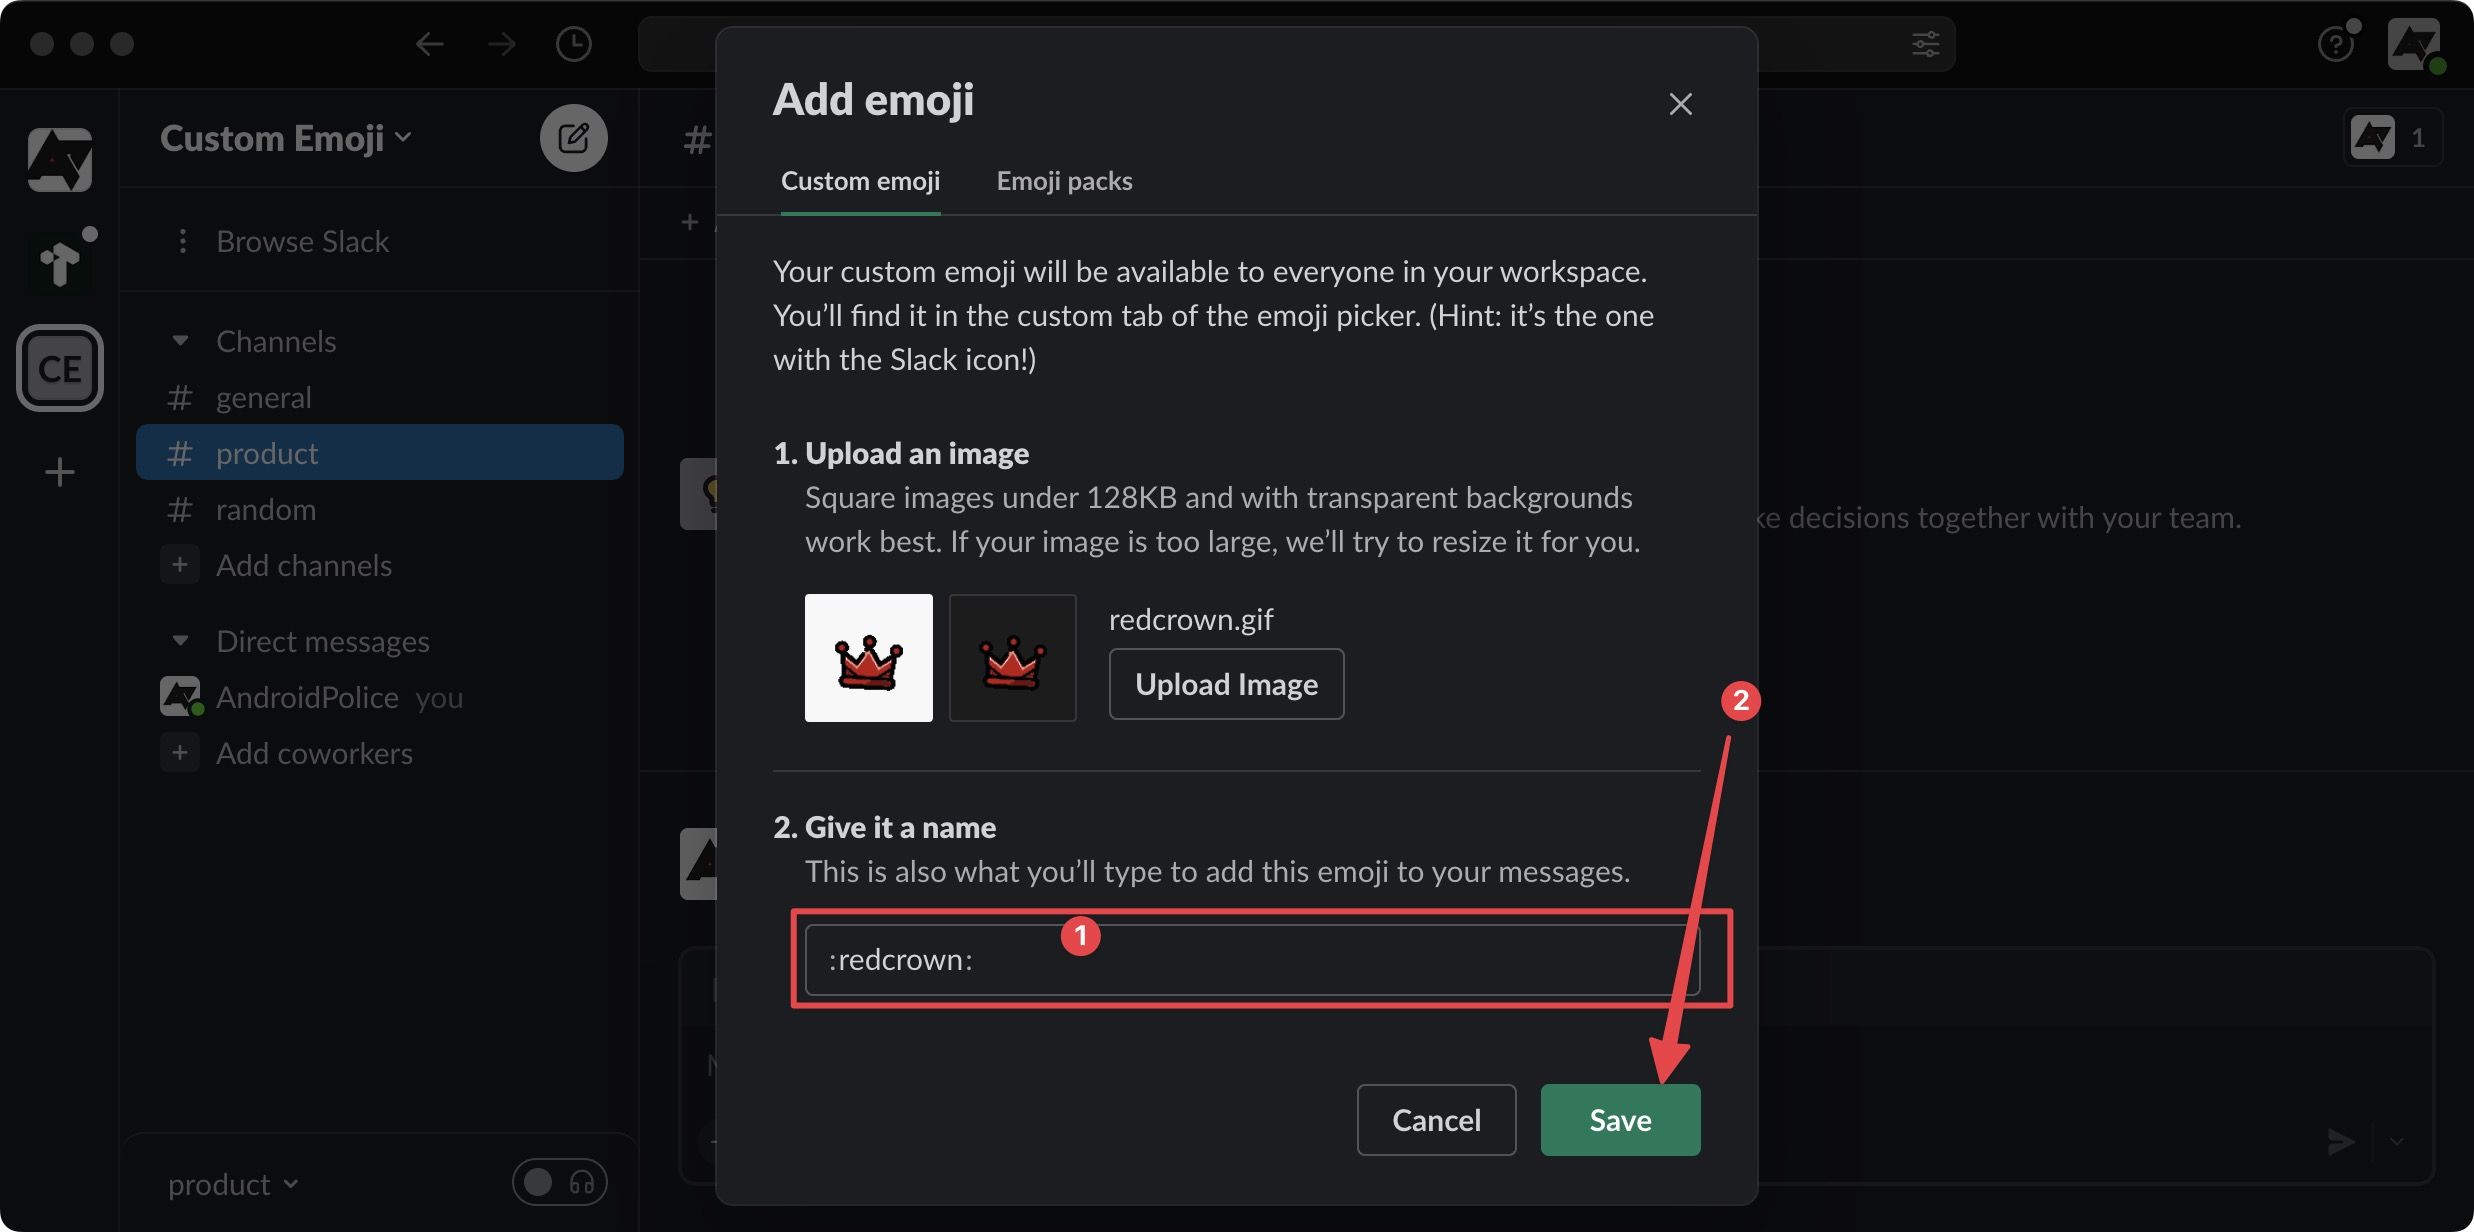 A pop-up window for adding an emoji, featuring information on custom emojis. An arrow points towards the text box filled with the name 'redcrown', indicating the name for the new custom emoji.